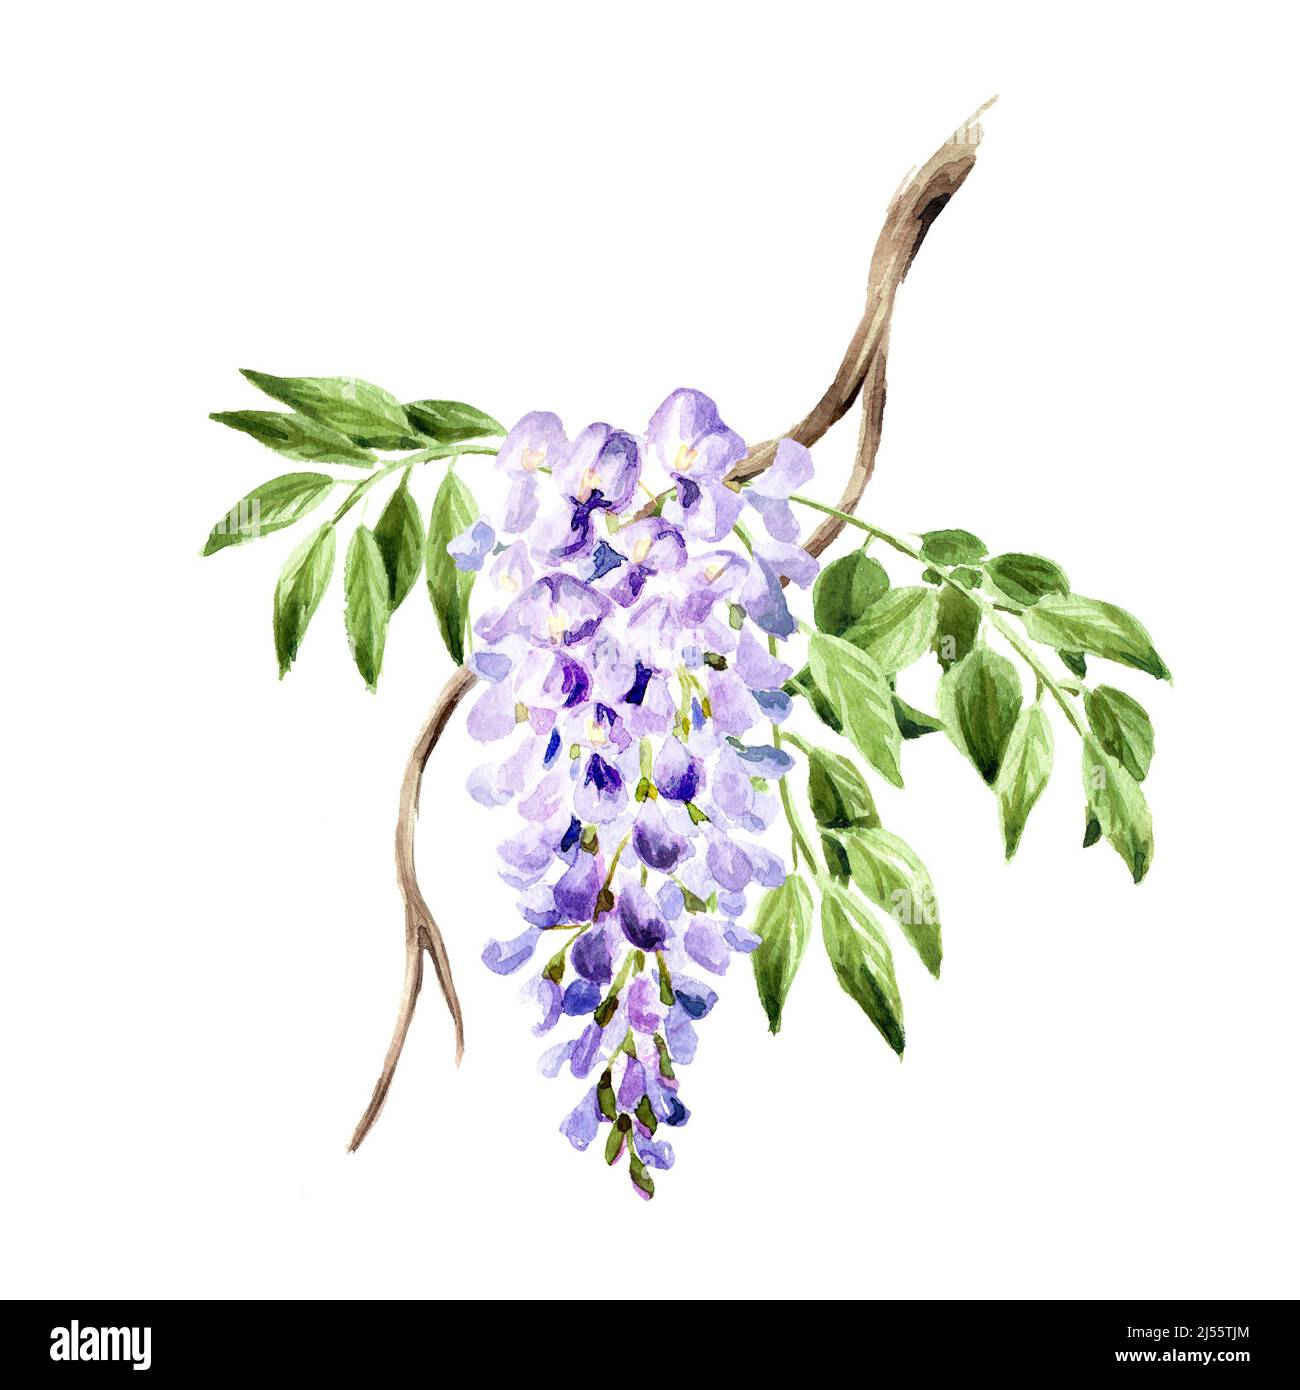 Wisteria flower  blossom branch.  Hand  drawn watercolor  illustration isolated on white background Stock Photo